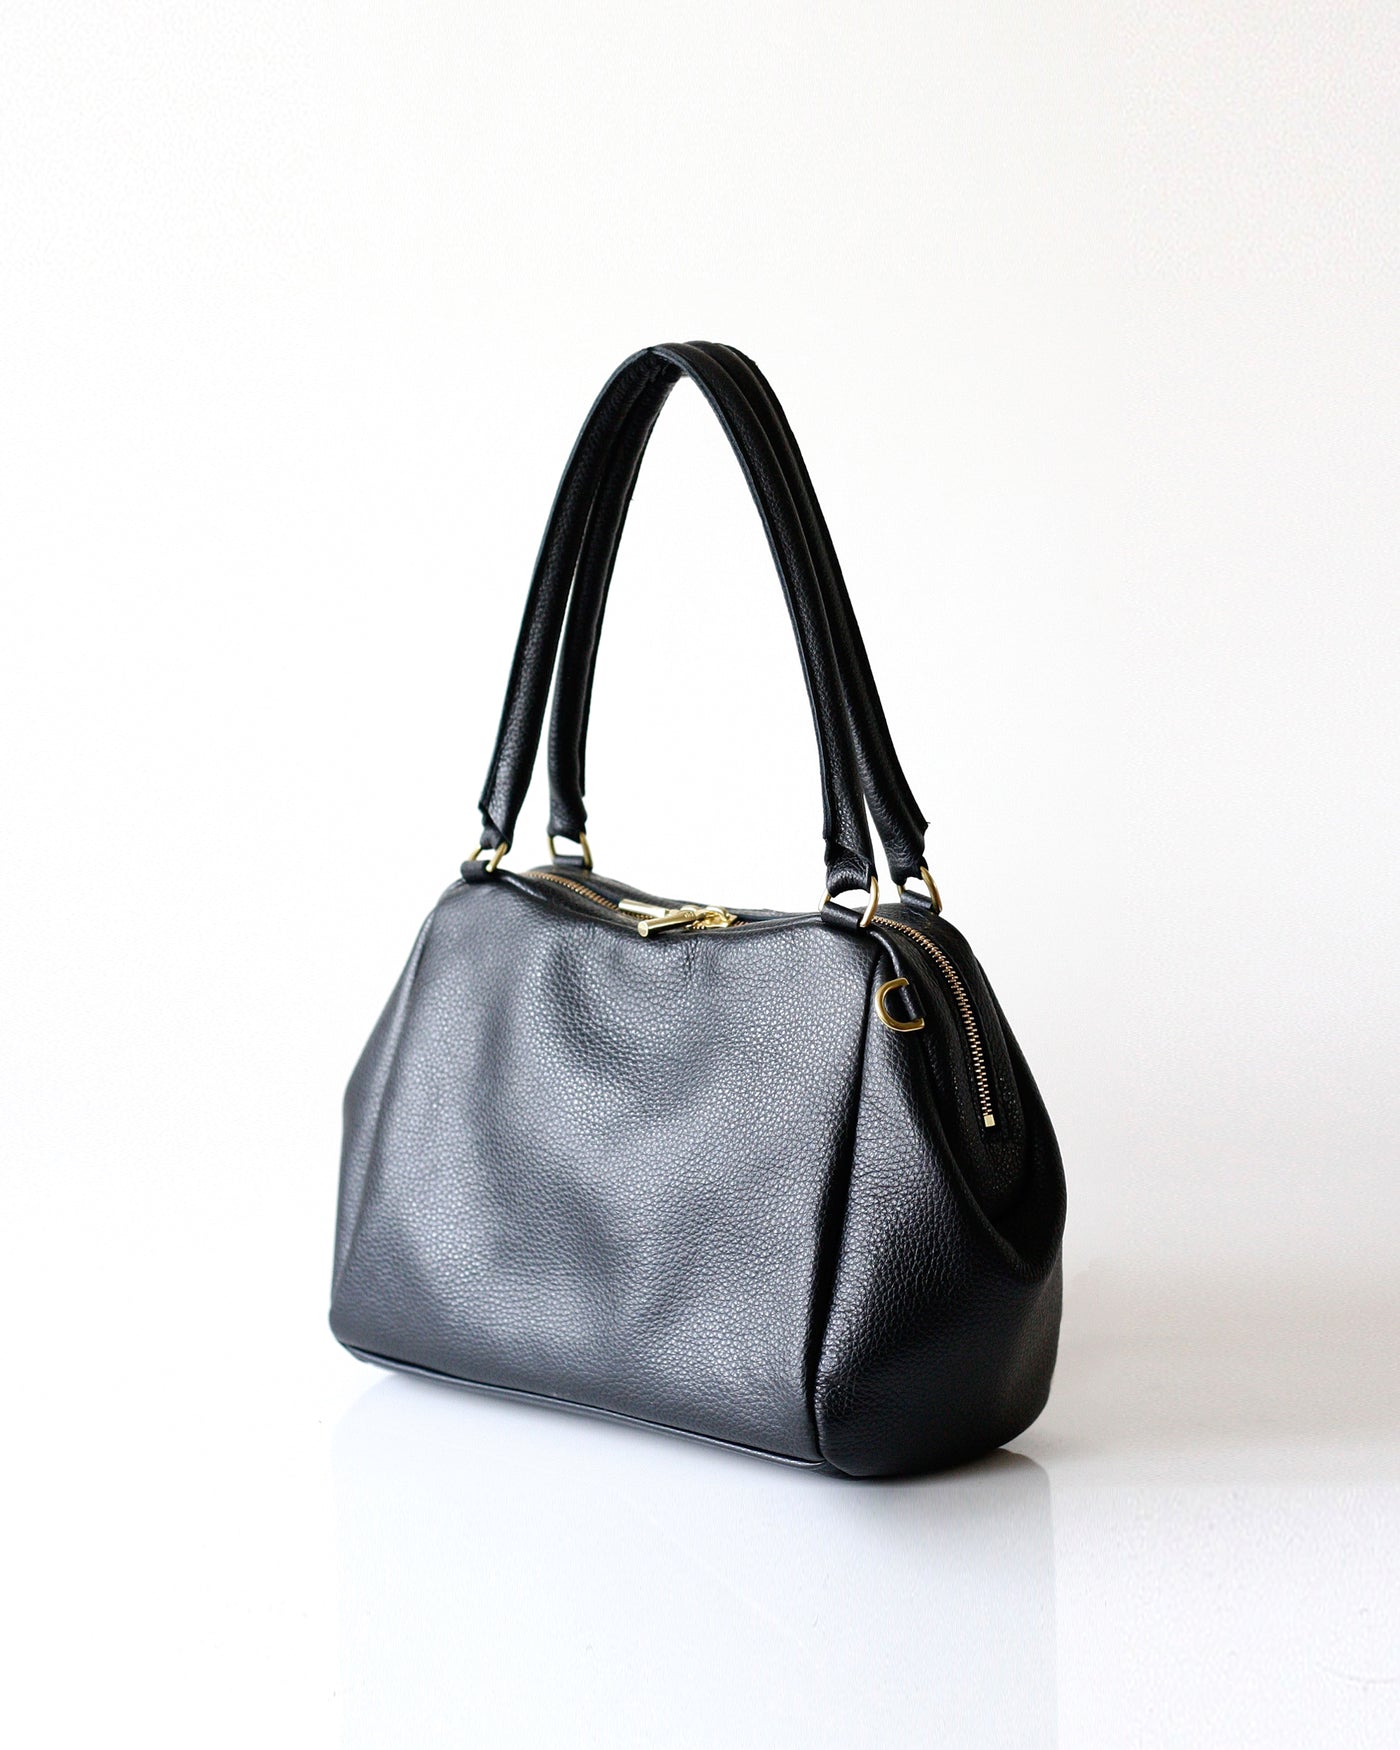 Odine Satchel - Opelle bag Permanent Collection - Opelle leather handbag handcrafted leather bag toronto Canada